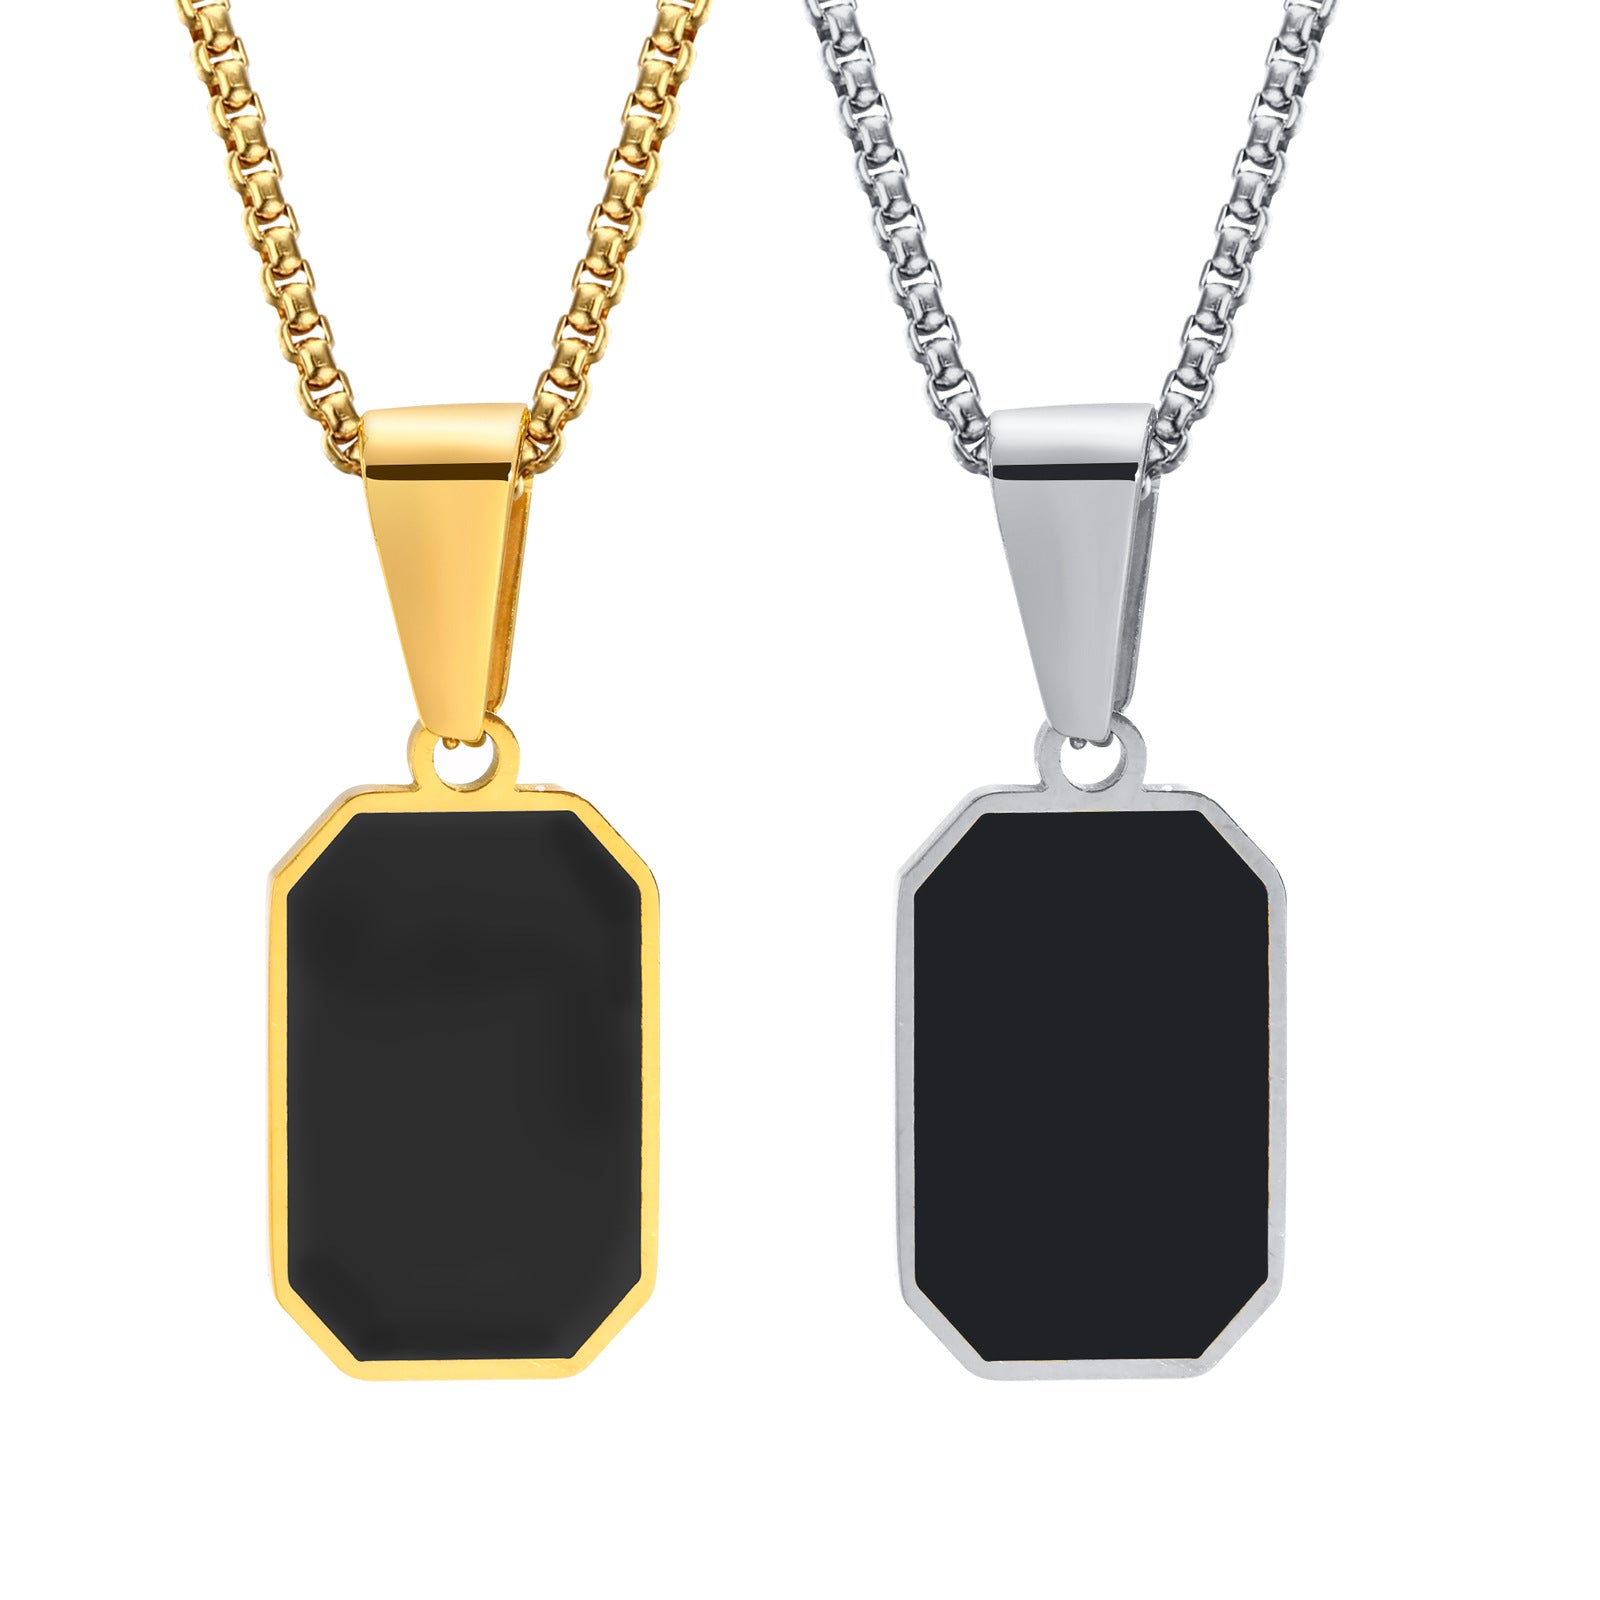 Regal Symmetry: The Polished Vanguard Stainless steel Necklace